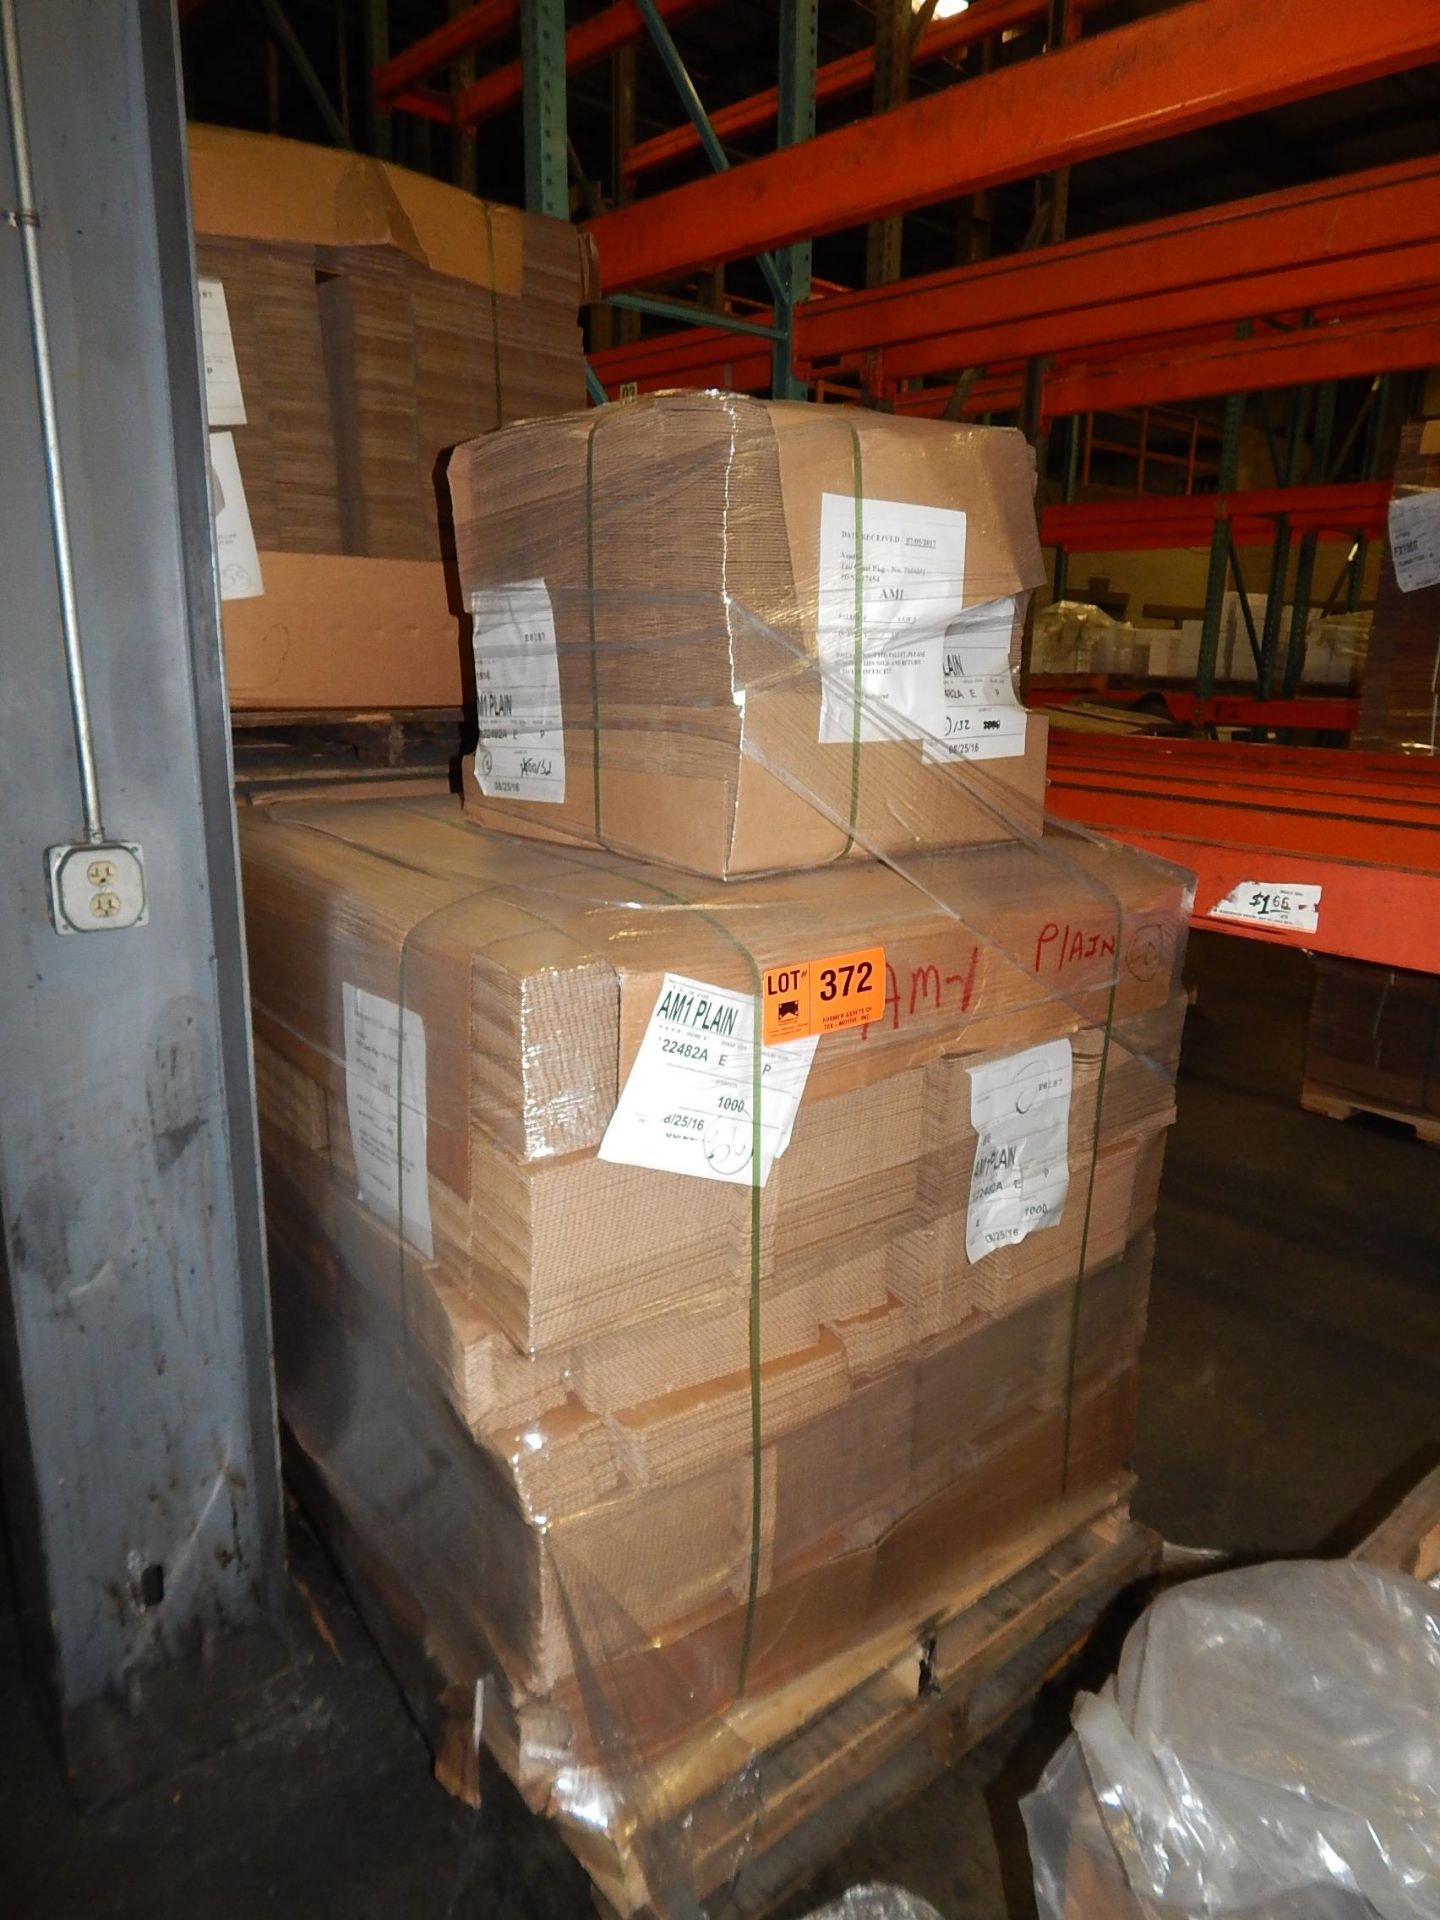 LOT/ APPROX. 1000 12" X 4" X 5" BOXES